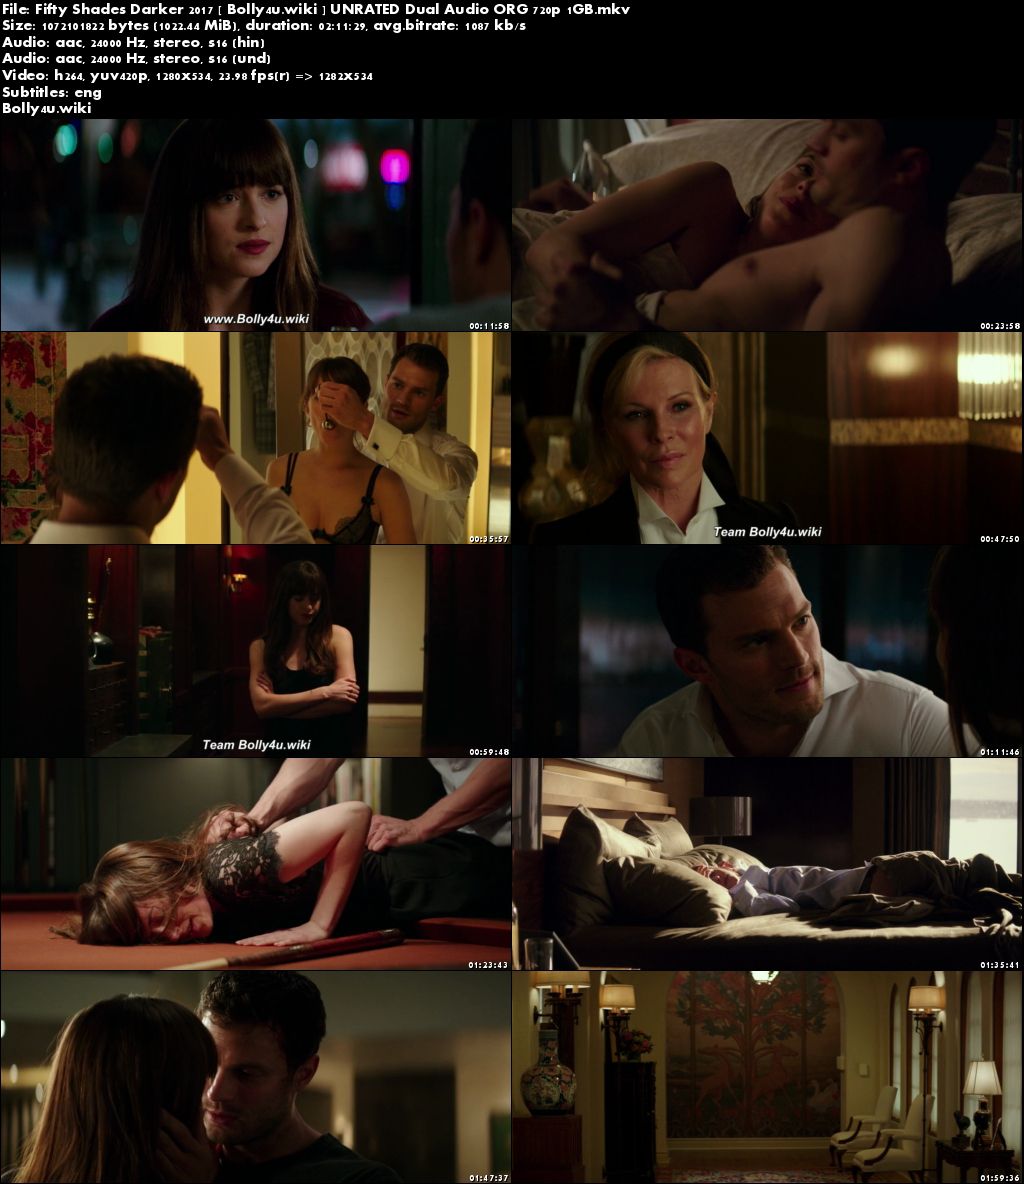 Fifty Shades Darker 2017 BRRip 1GB UNRATED Hindi Dual Audio ORG 720p Download